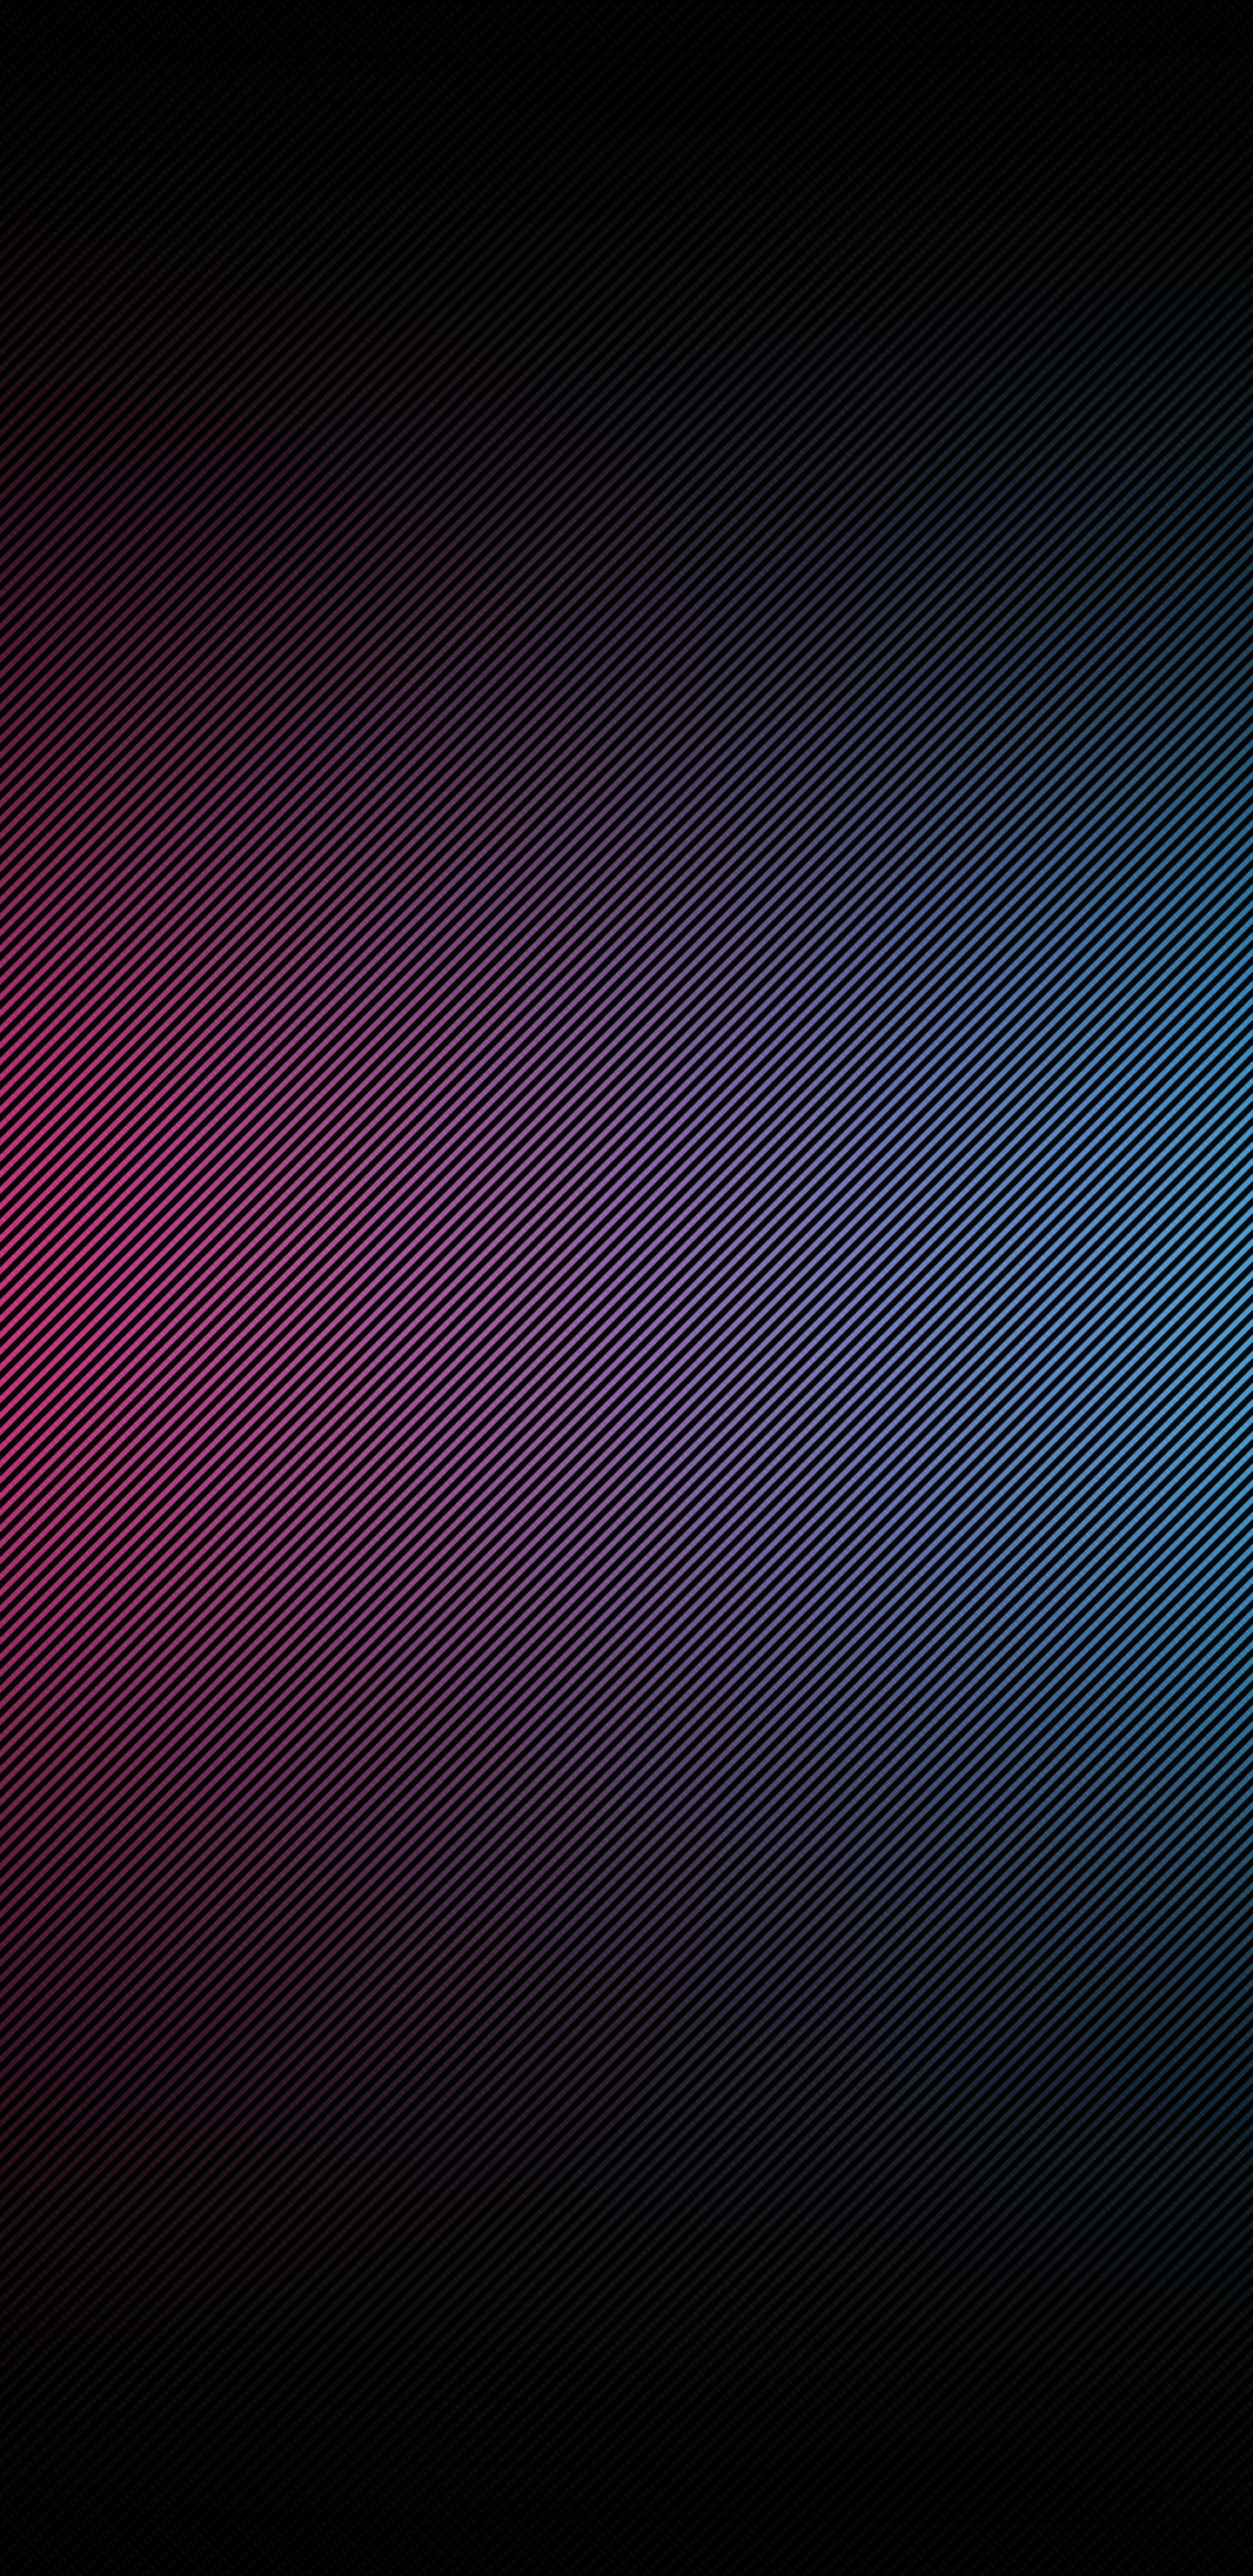 1430472 free wallpaper 640x200 for phone, download images  640x200 for mobile